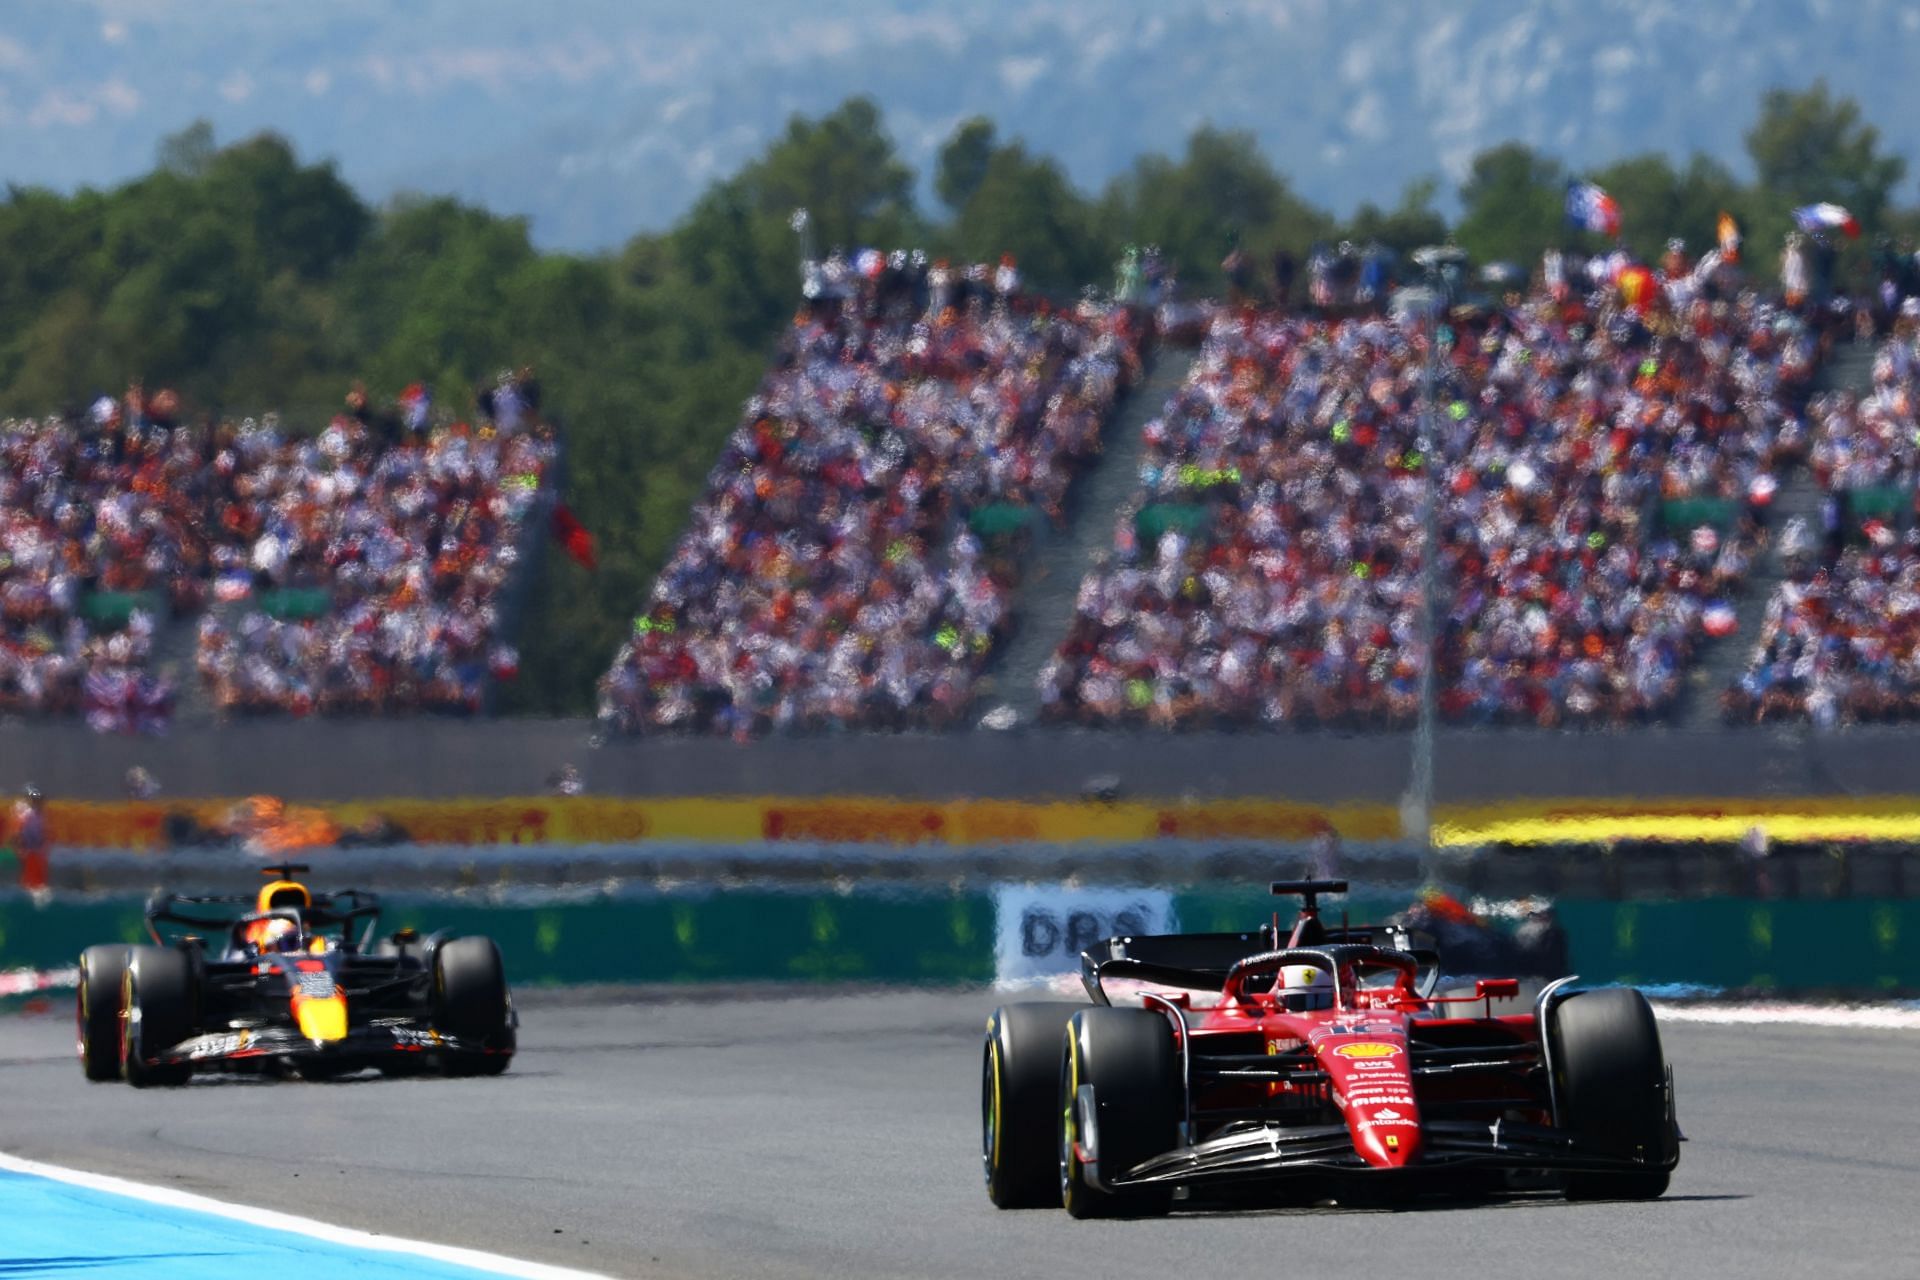 Red Bull driver Max Verstappen (background) and Ferrari driver Charles Leclerc (foreground) in action during the 2022 F1 French GP (Photo by Mark Thompson/Getty Images)